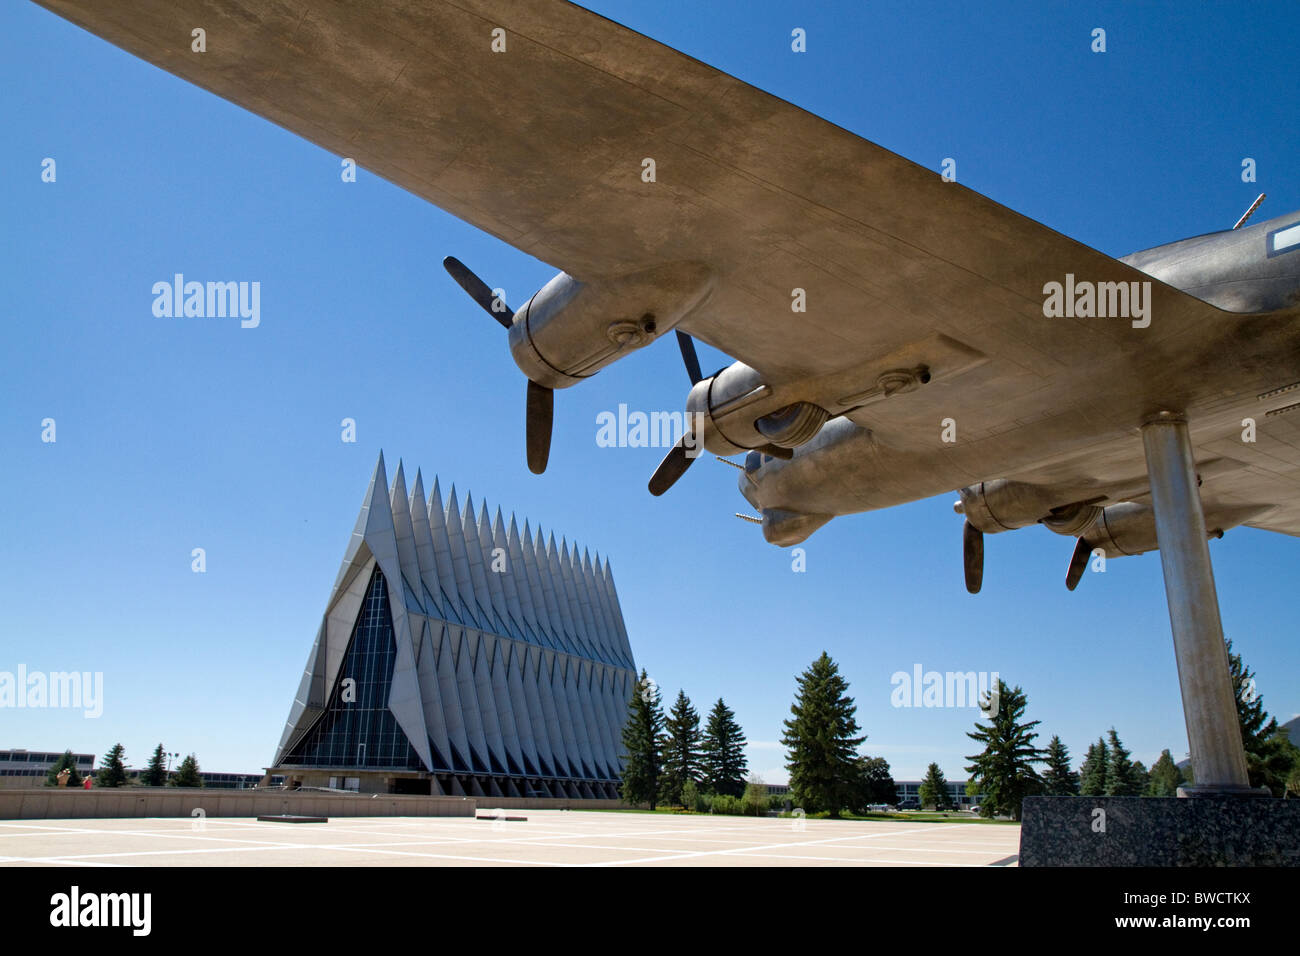 Bronze sculpture of vintage WW11 aircraft in front of the Cadet Chapel at the Air Force Academy, Colorado Springs, Colorado, USA Stock Photo